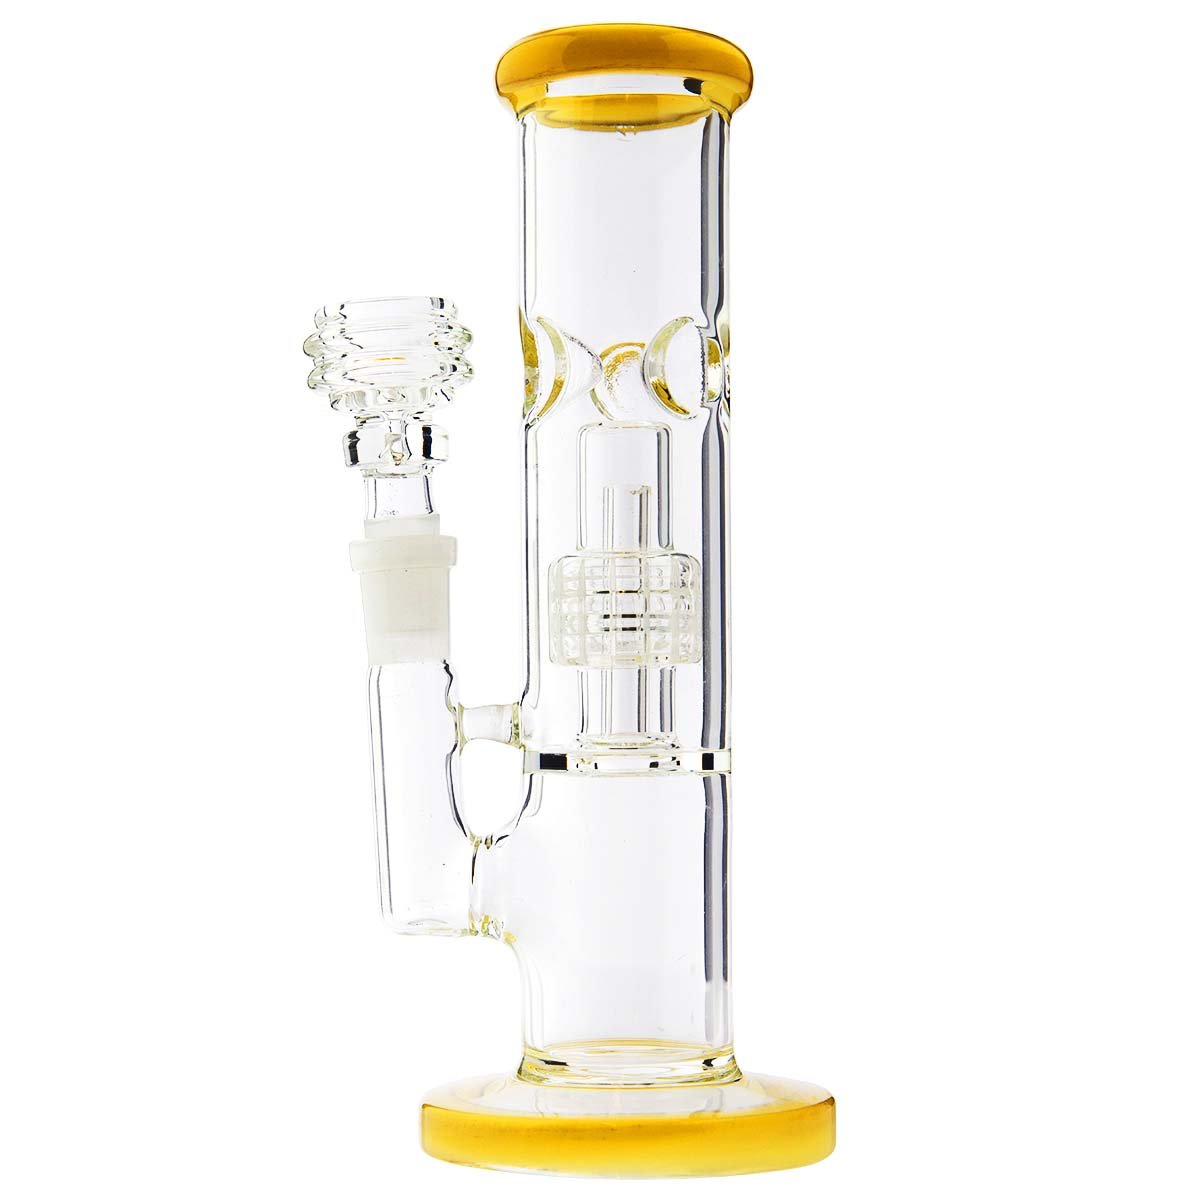 Waterpipe G/g Conical Showerhead 8 14Mm Female With Bowl And Banger